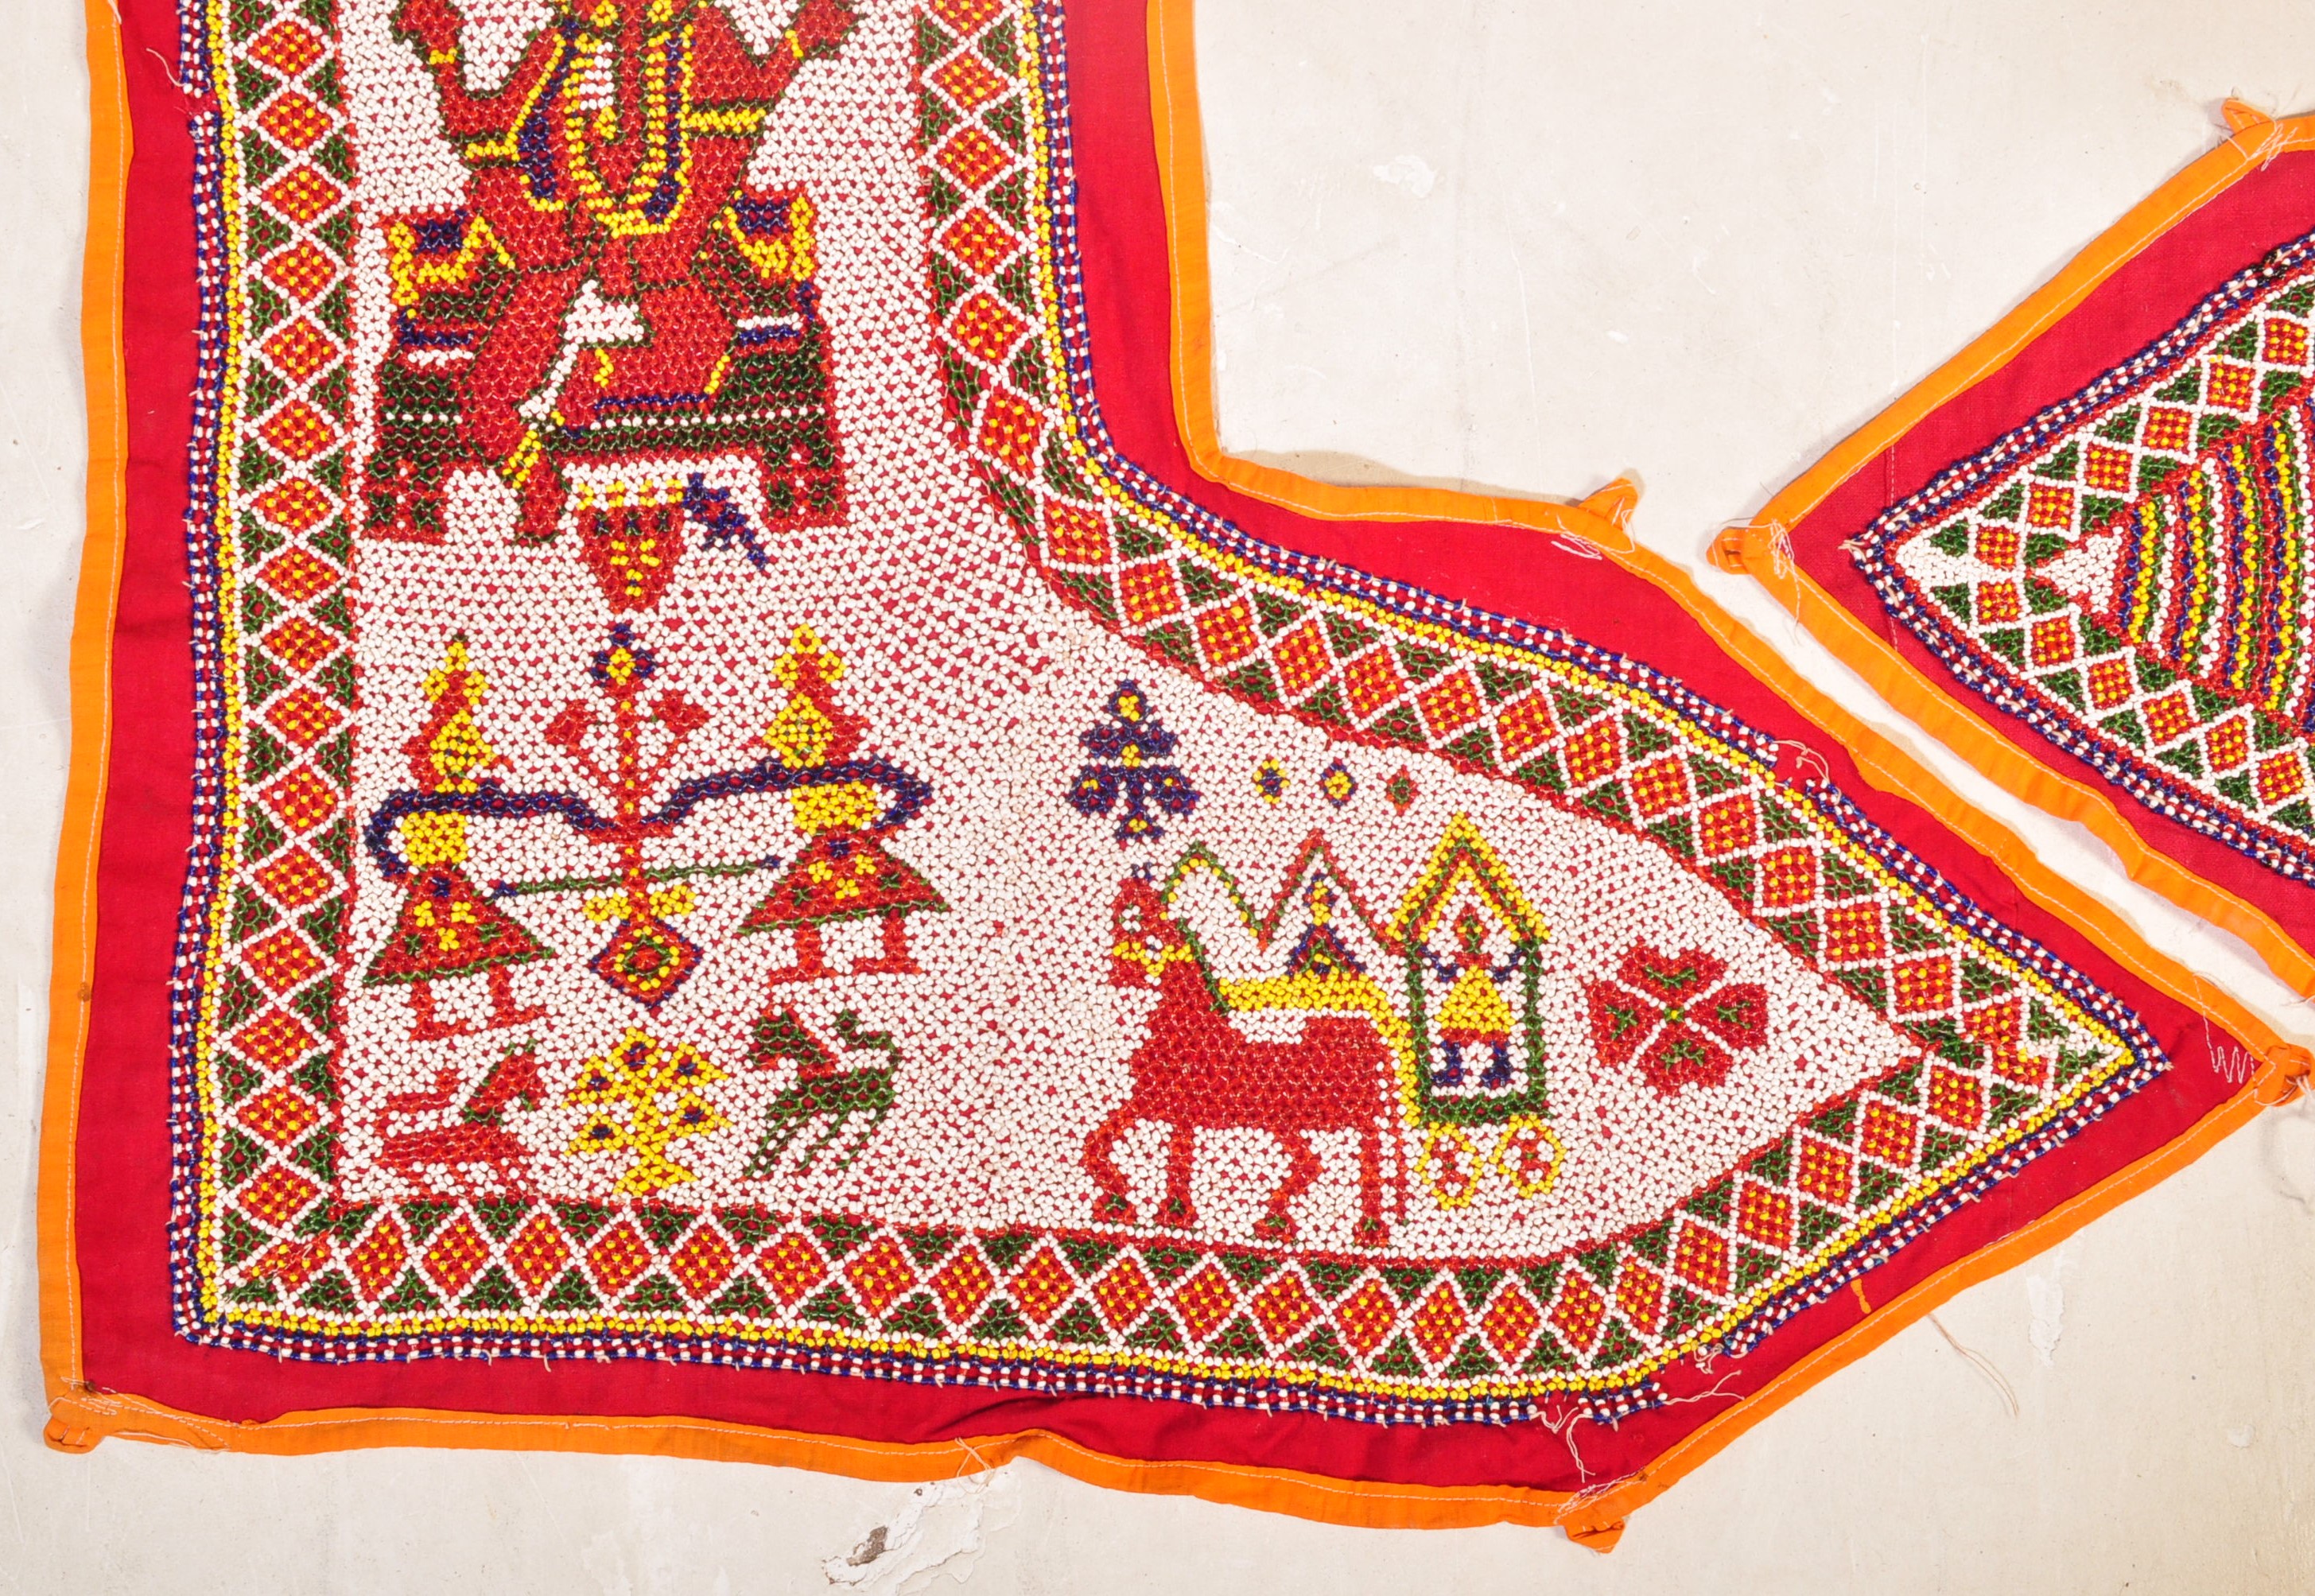 HAND MADE INDIAN BEADWORK WALL HANGING - Image 2 of 6